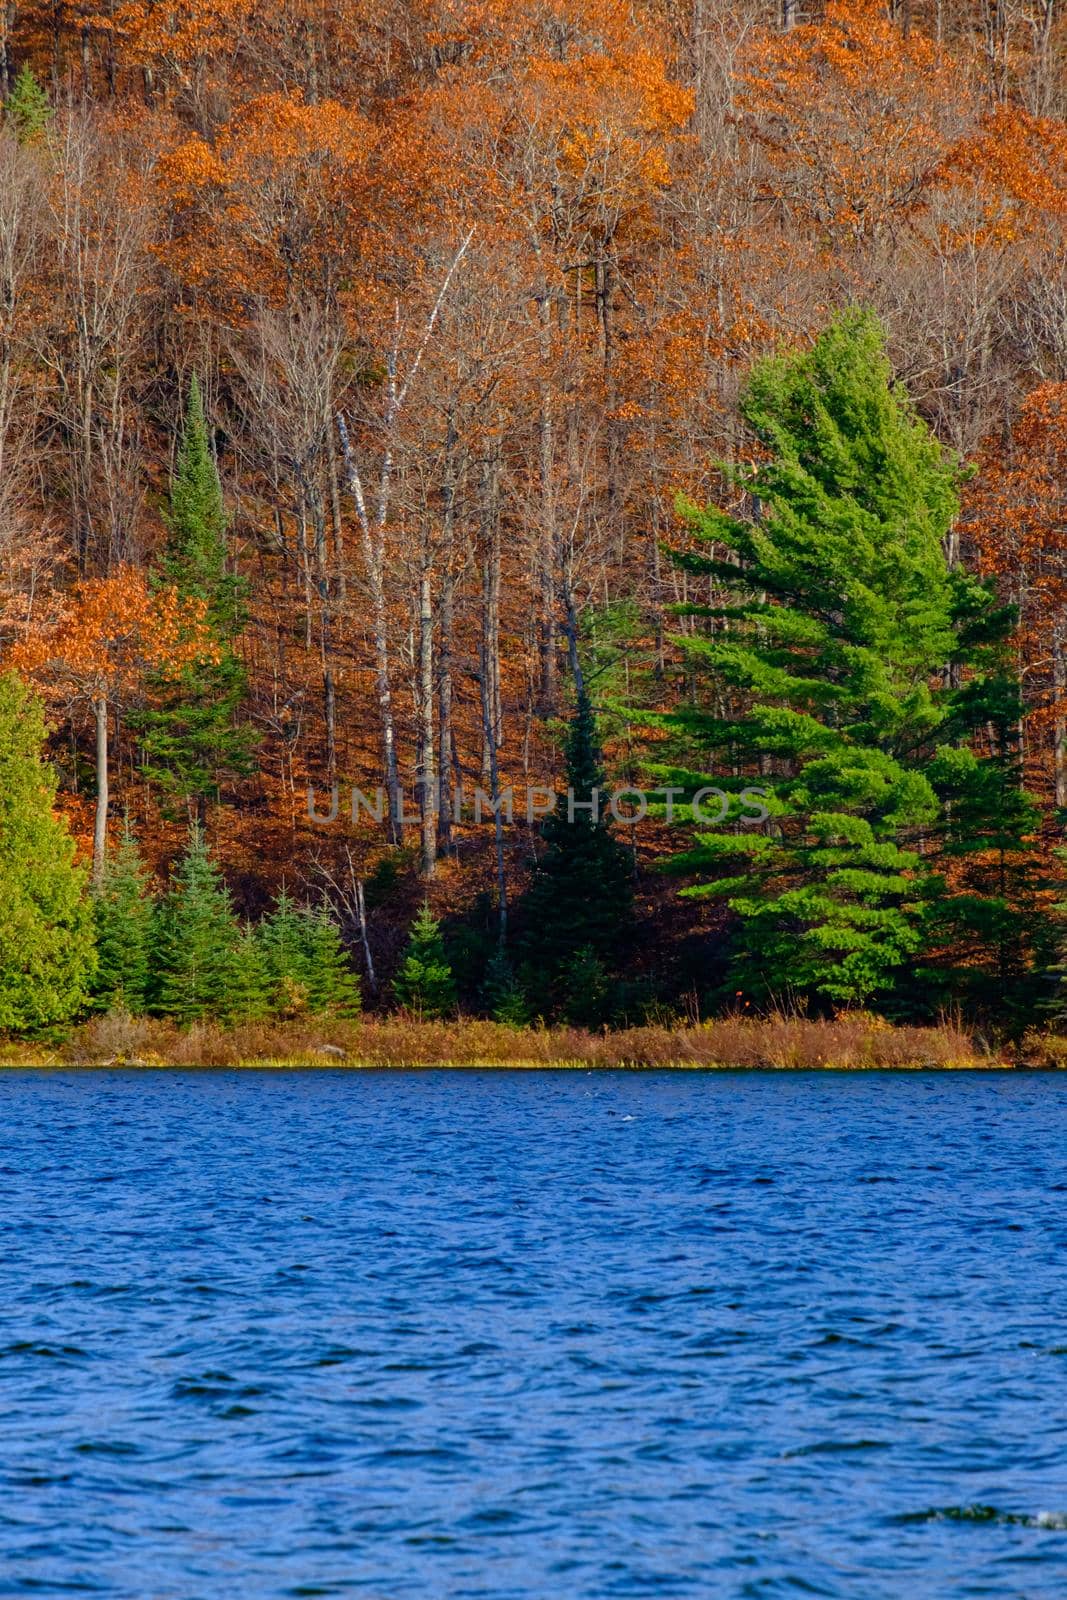 Evergreens amid orange leaves across a lake by colintemple